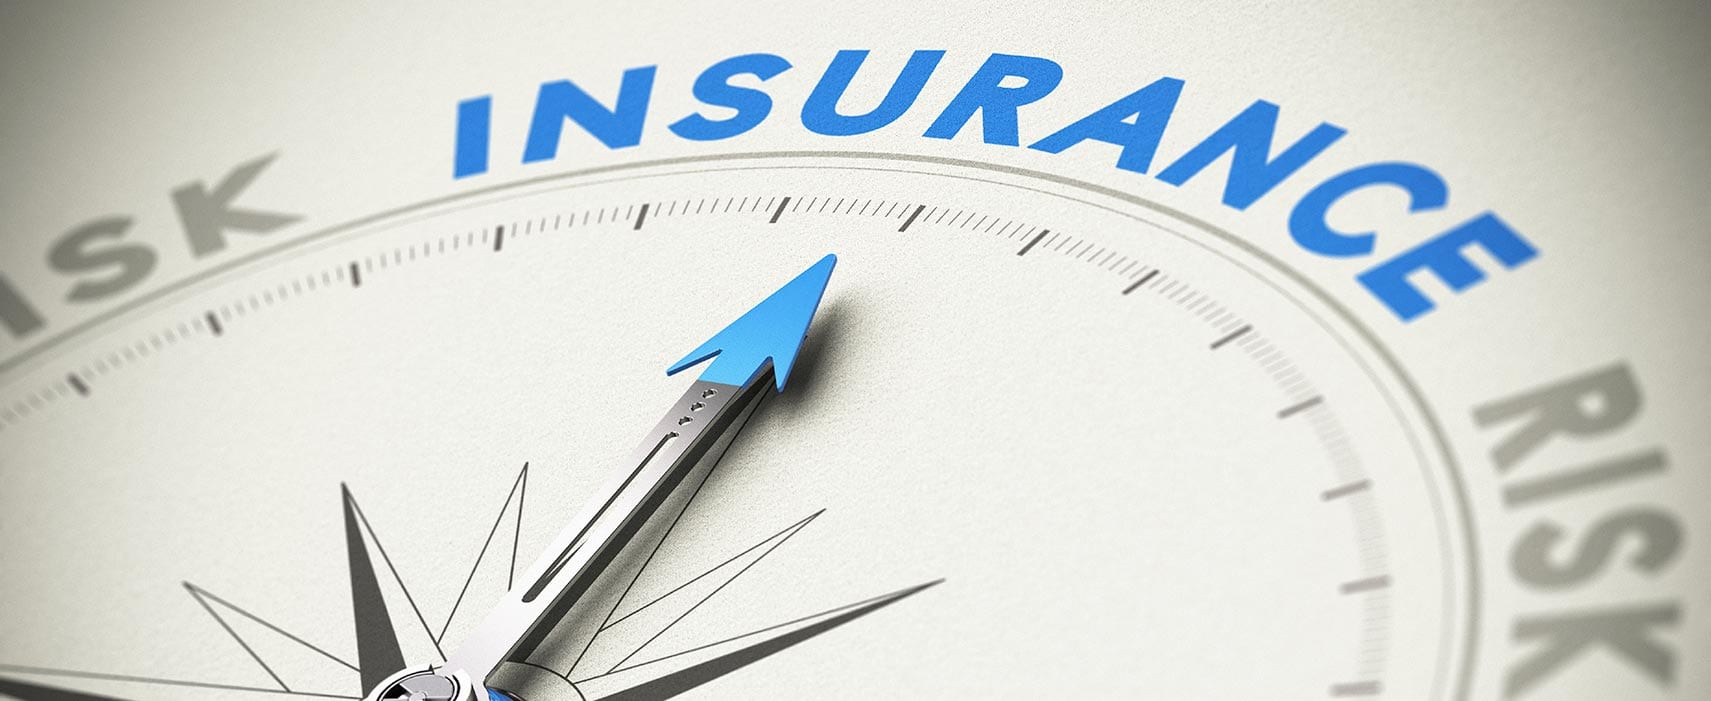 An overview of life insurance policy 1